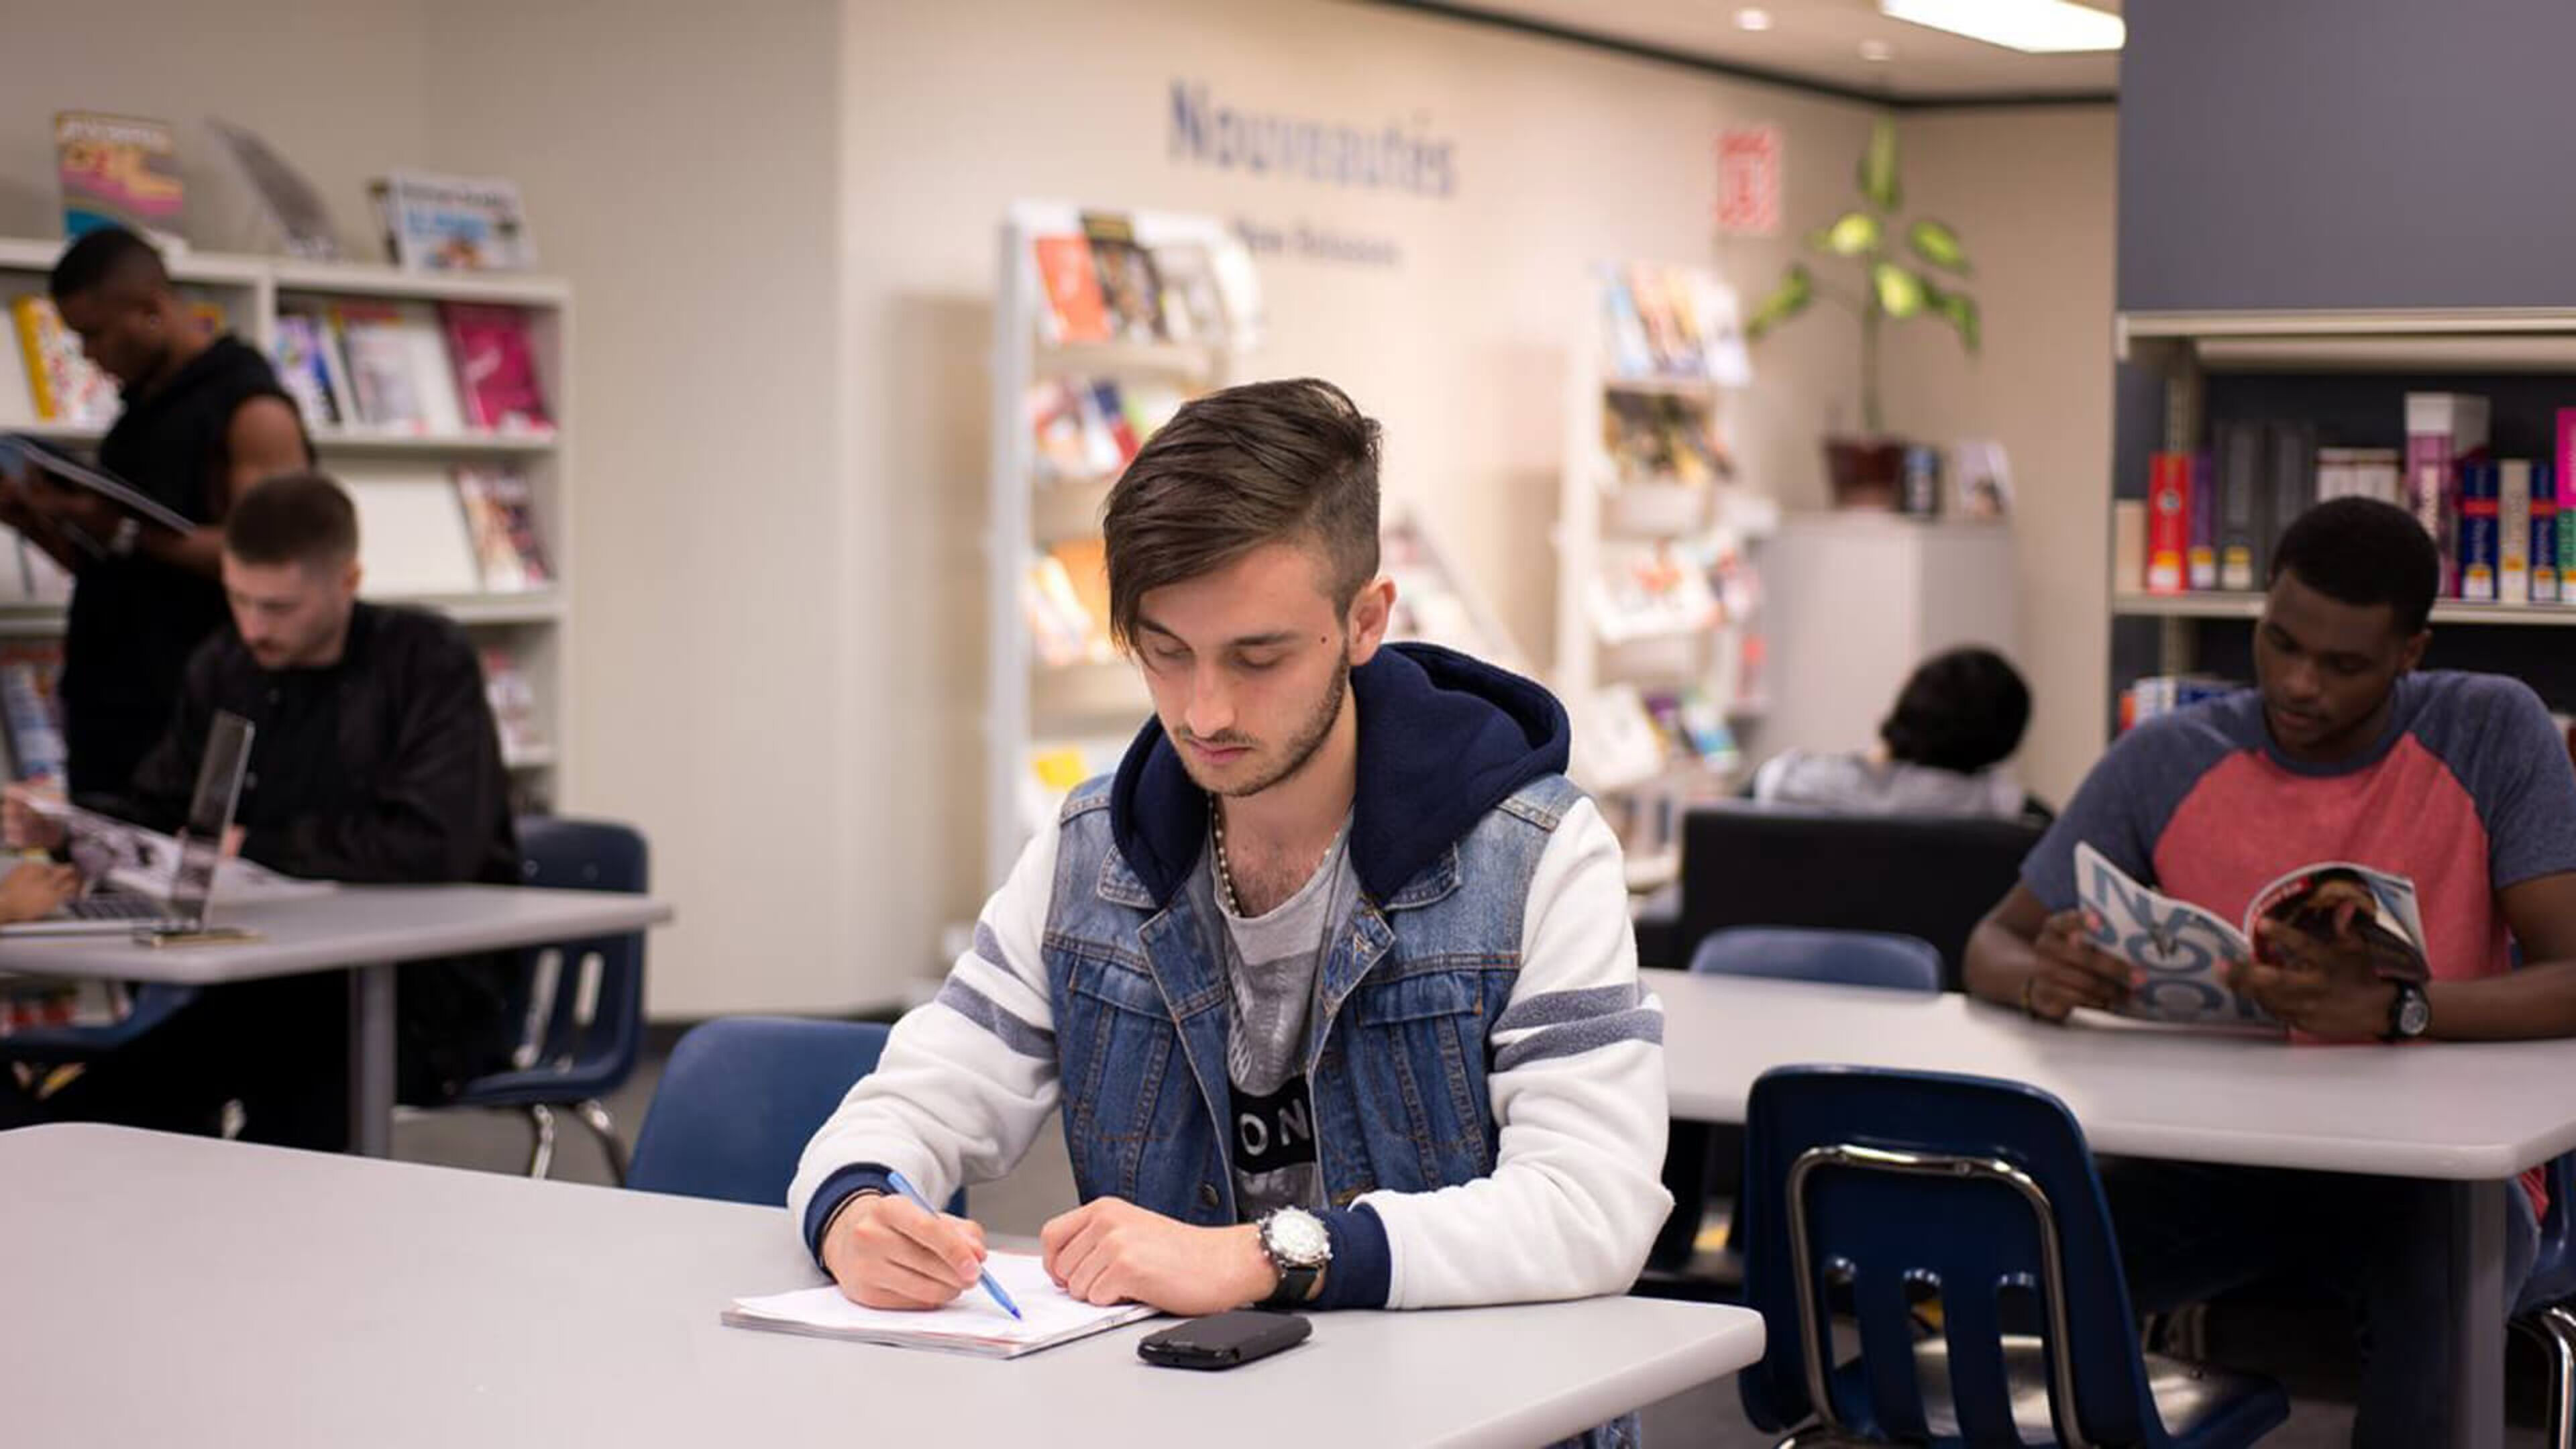 A young man in a denim jacket intently writes notes at a library table, while others read around him.